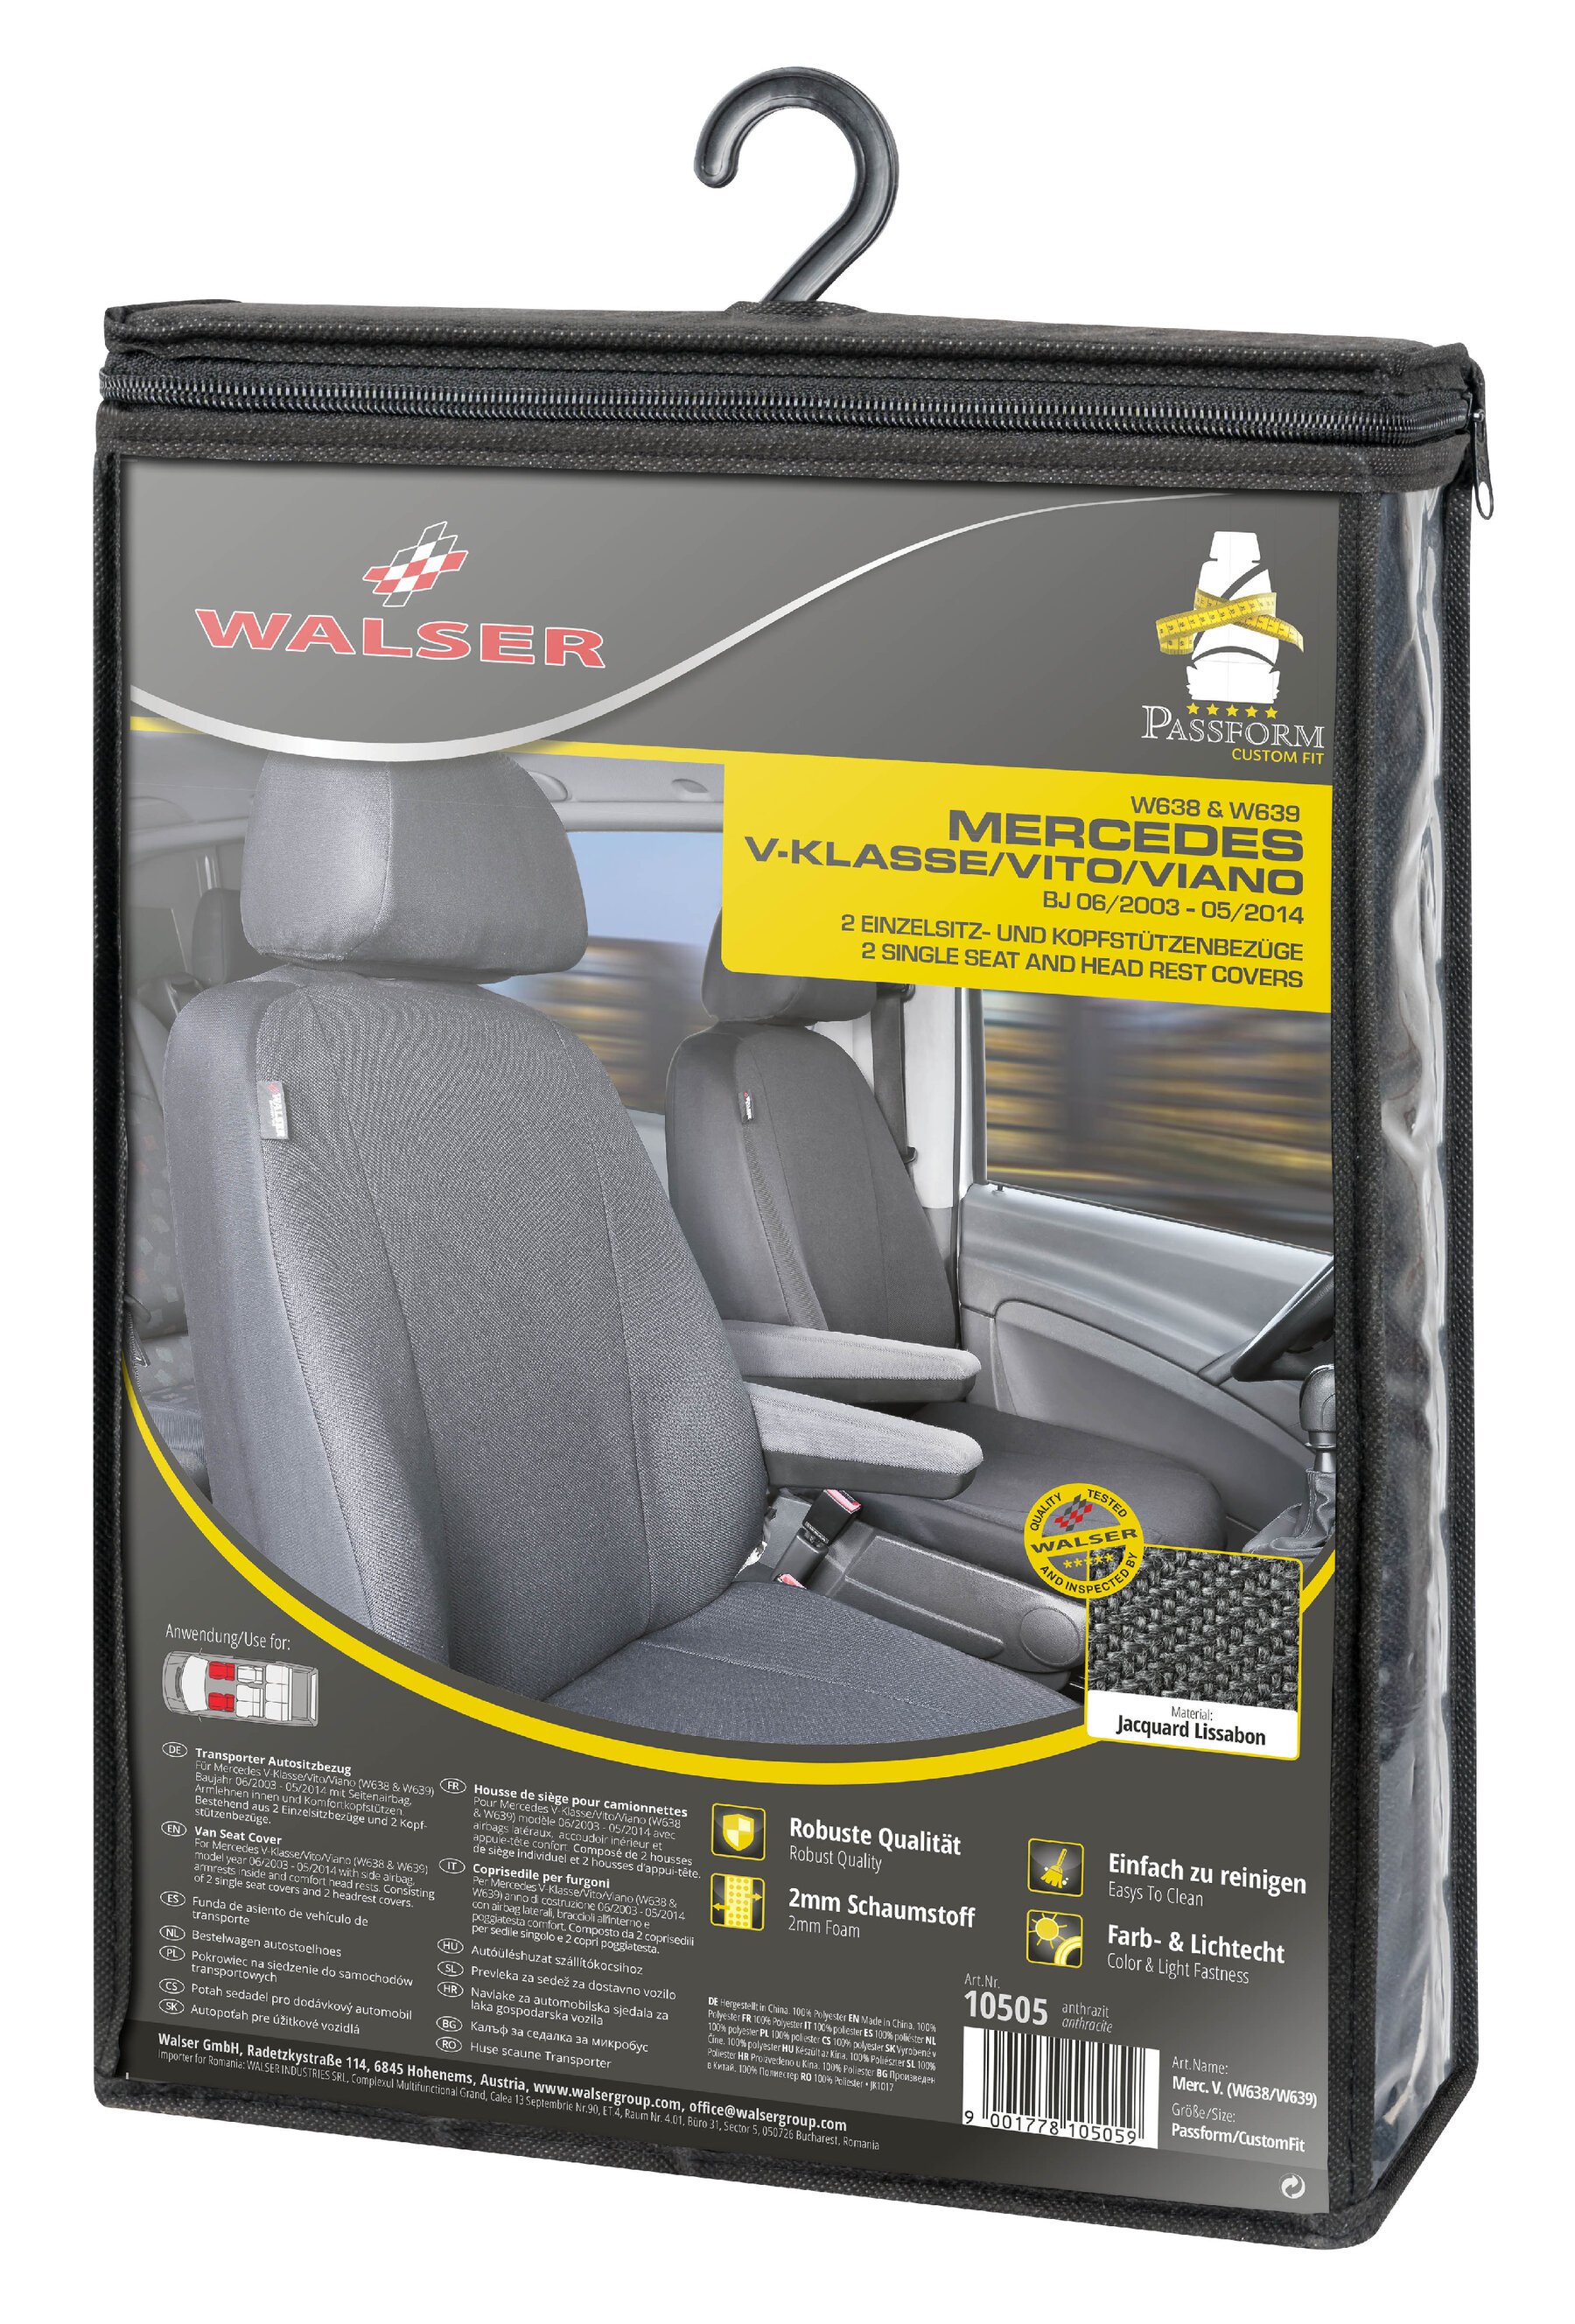 Car Seat cover Transporter made of fabric for Mercedes Vito/Viano, 2 single seats for armrest inside